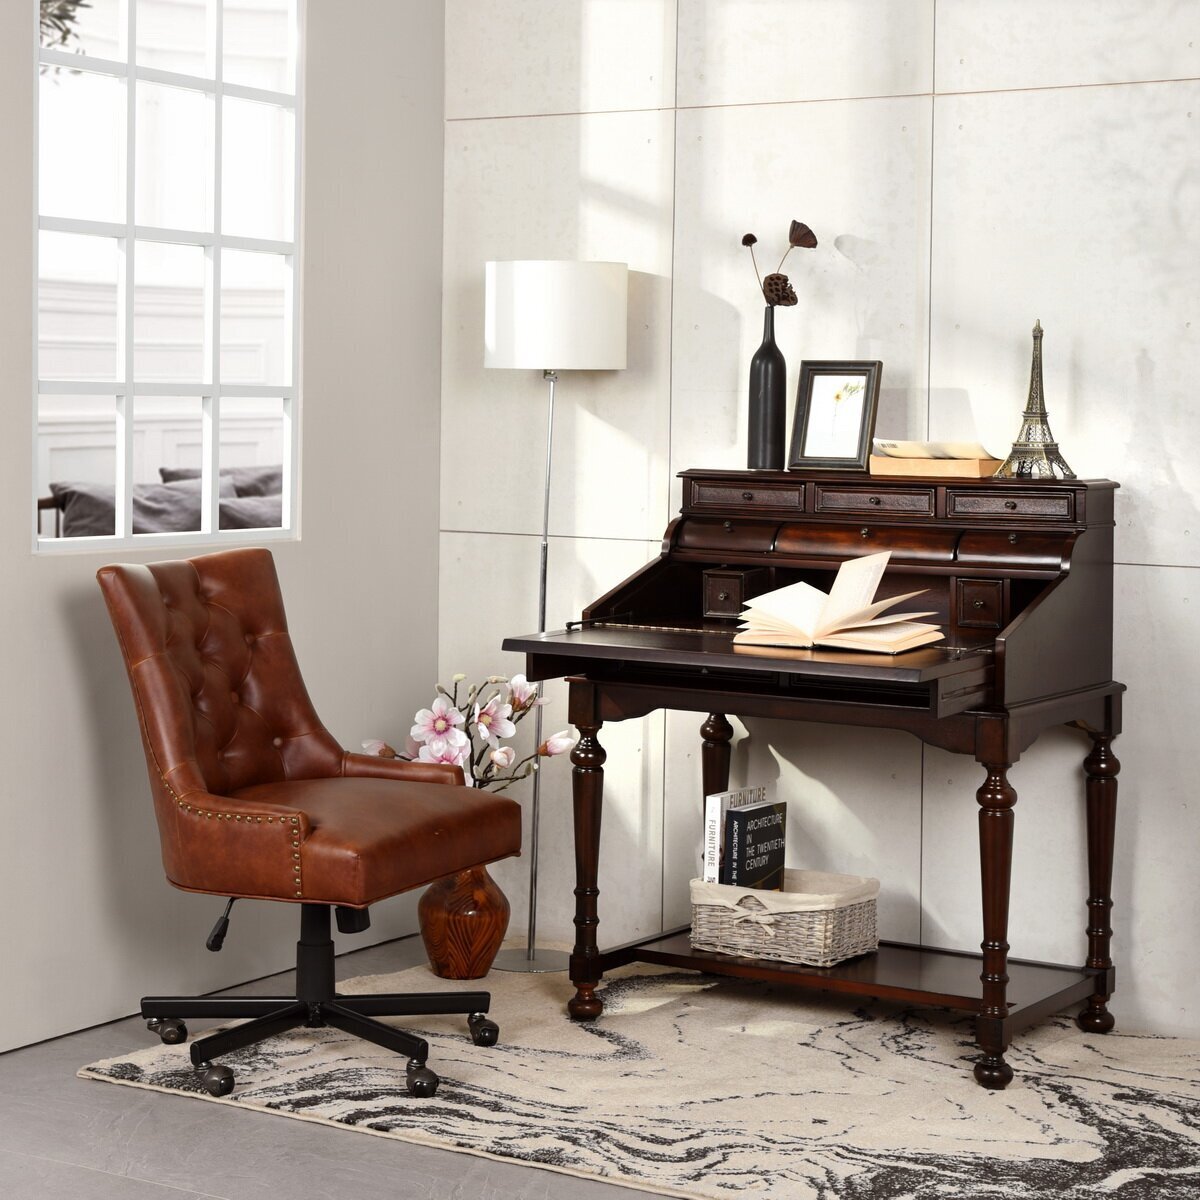 Secretary Desk with Antique Appeal